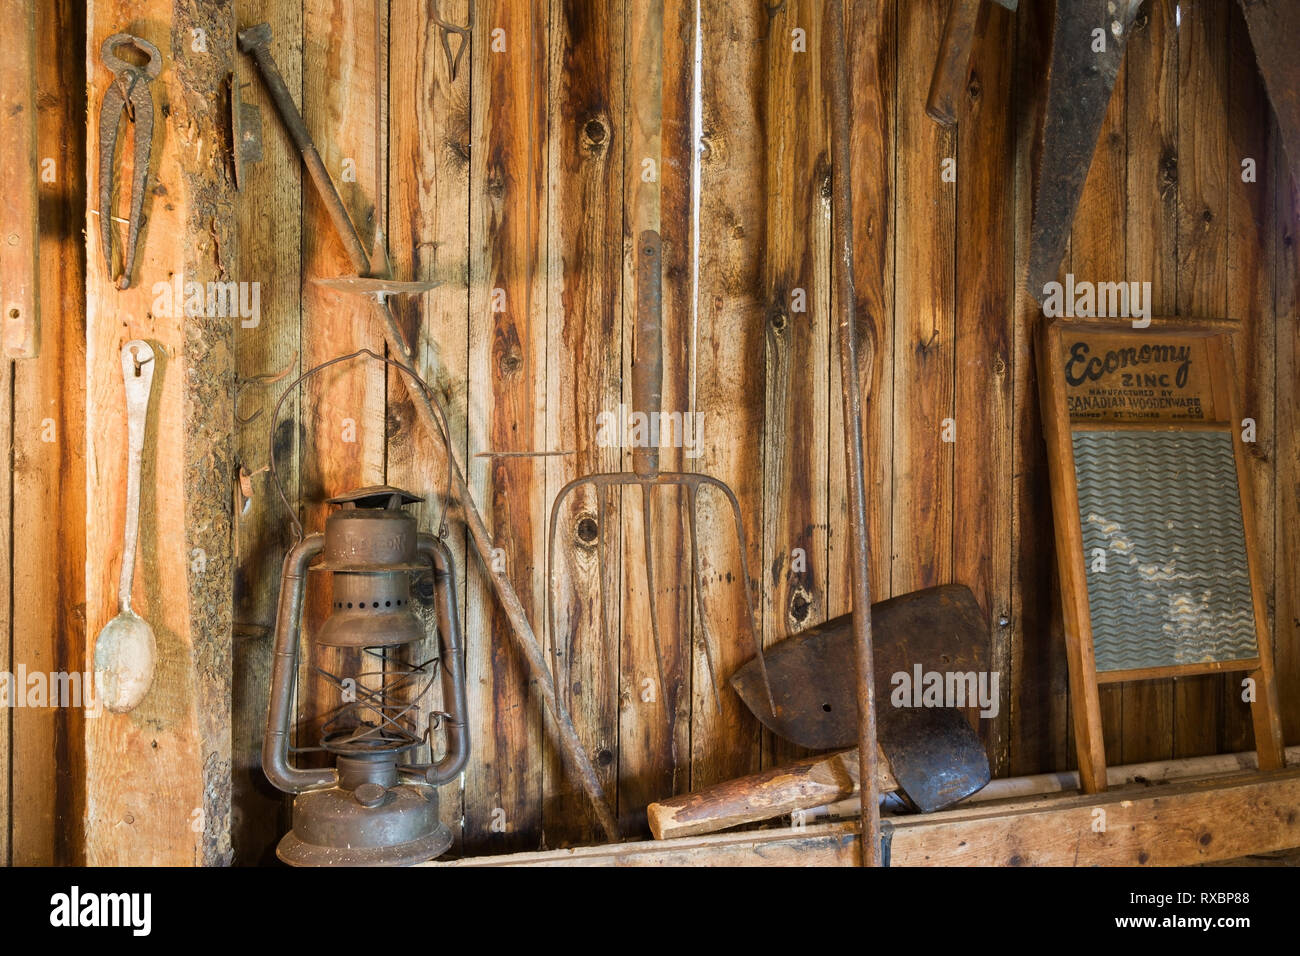 Antique oil lantern, pitchfork, shears, axe, saws, washboard and other manual toolshanging on vertical wood plank wall inside an old barn, Quebec, Canada. This image is property released. CUPR0332 Stock Photo